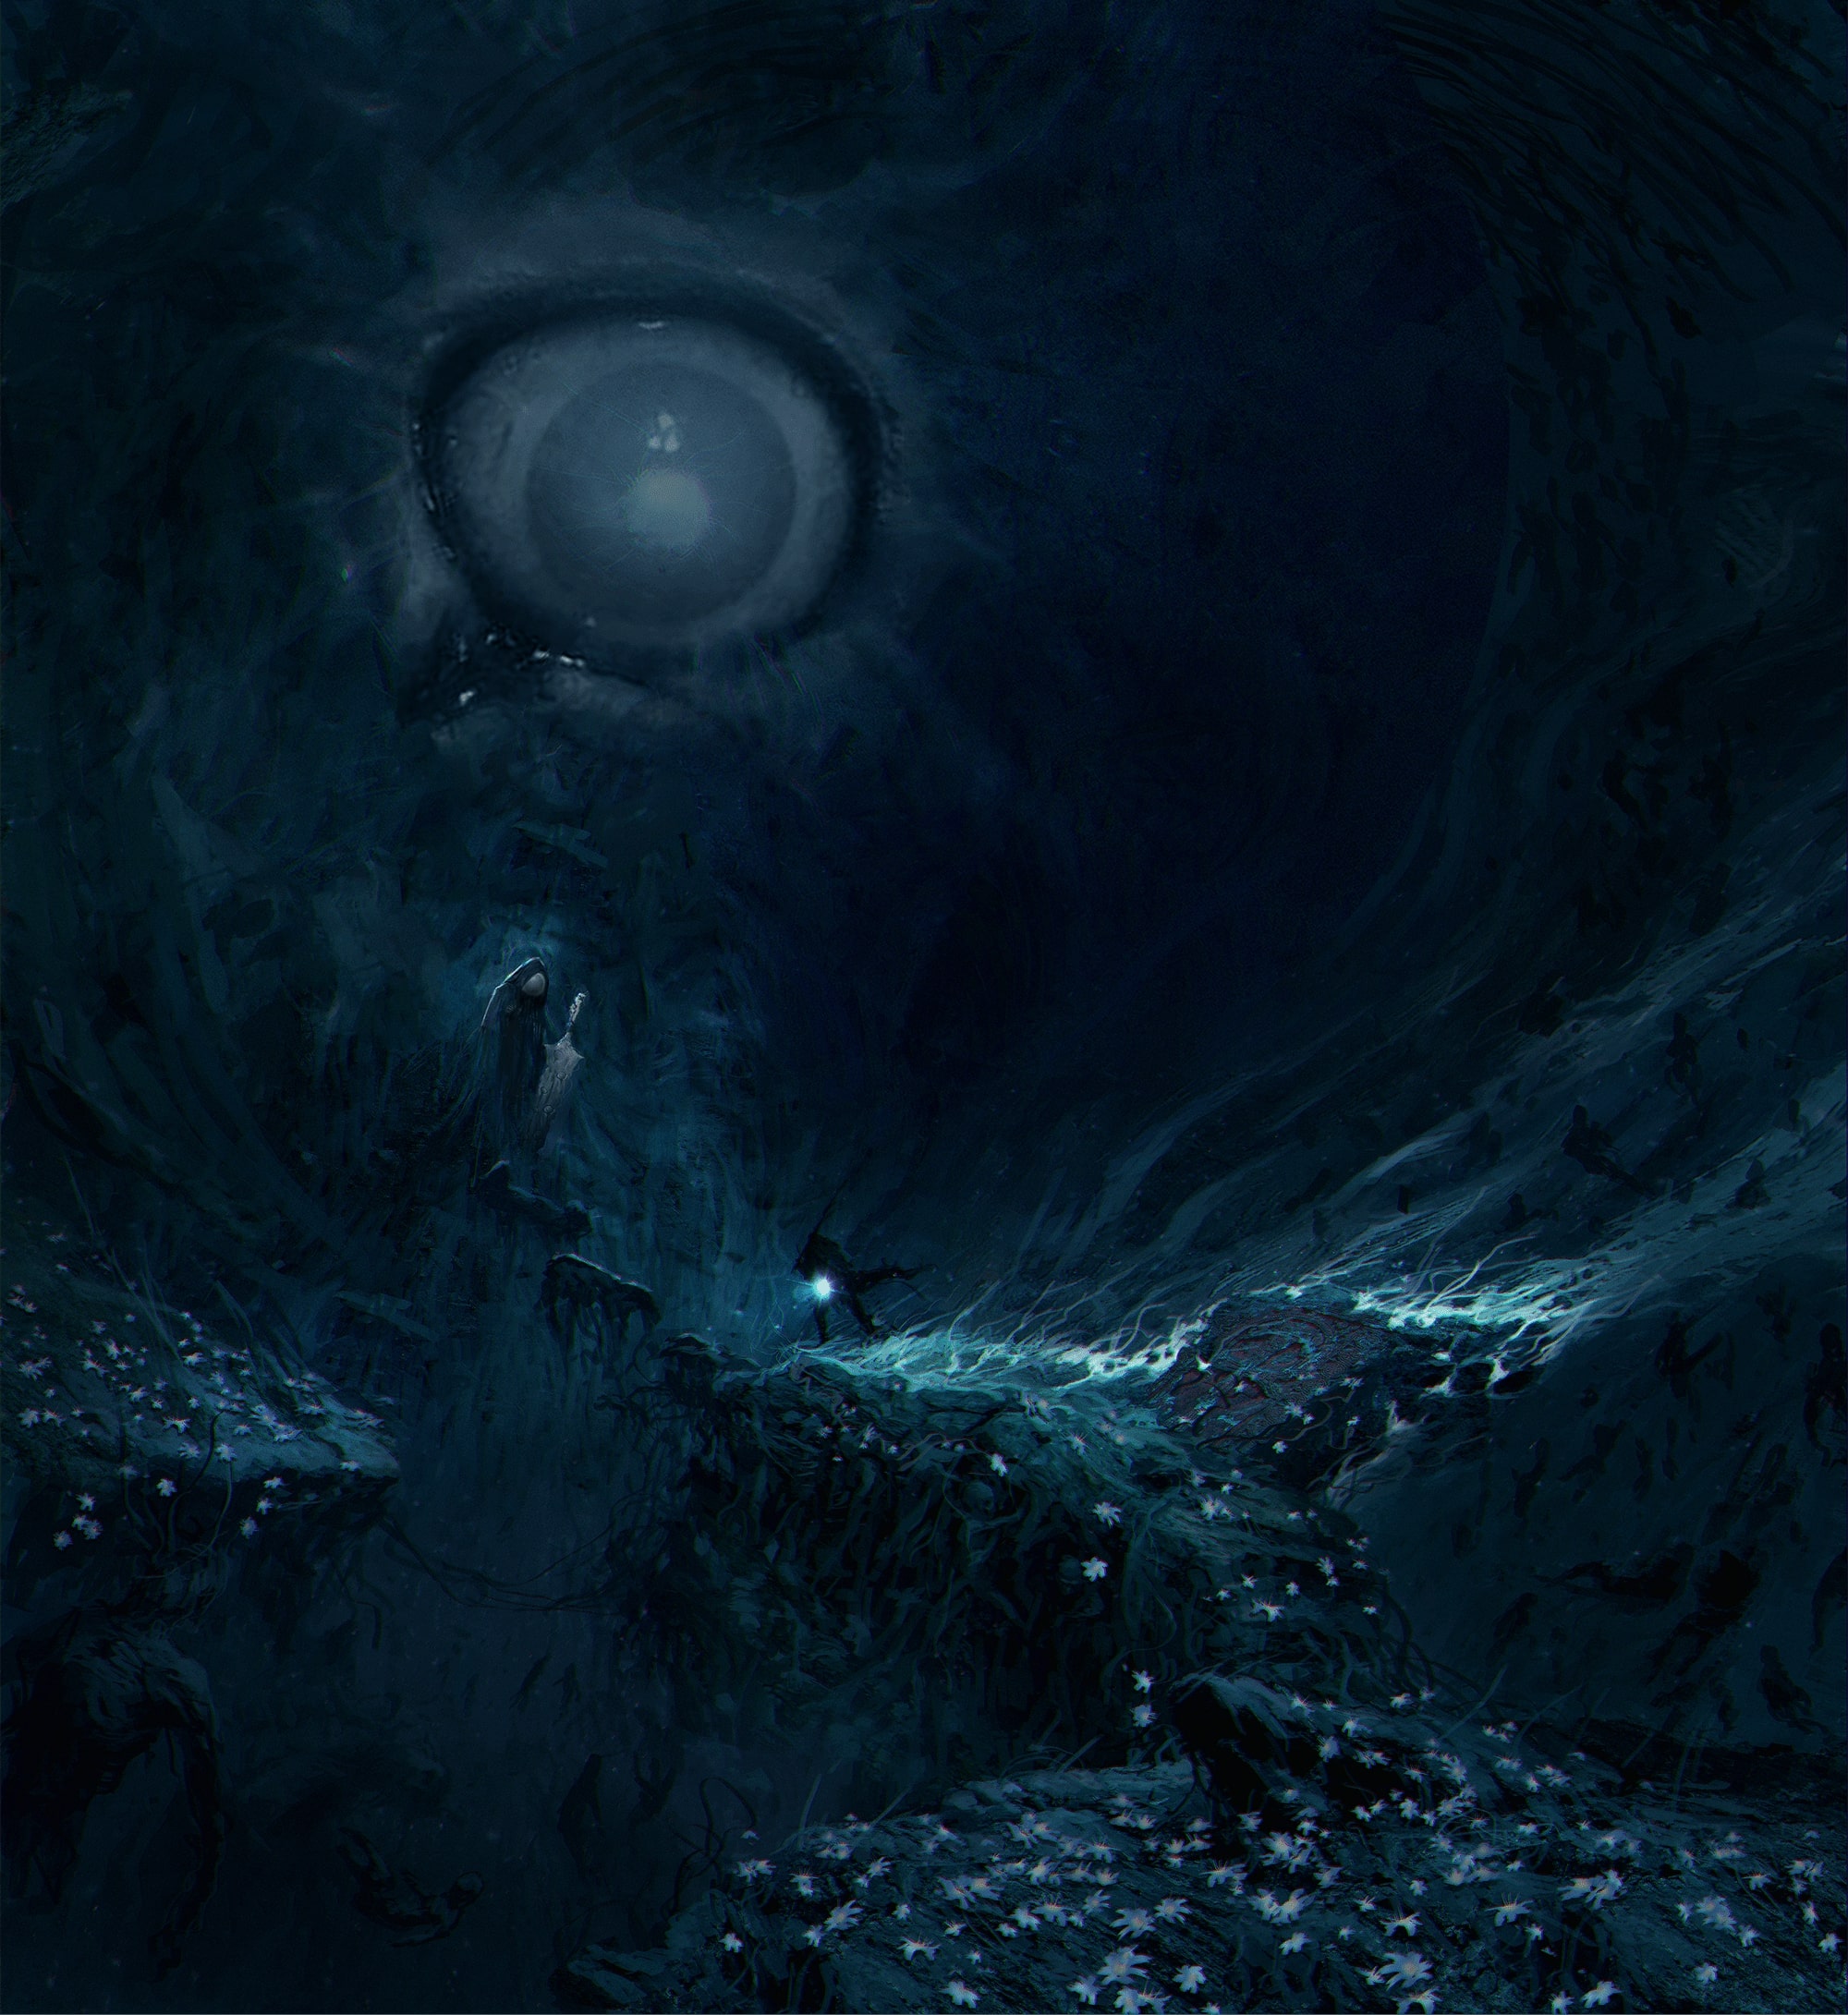 In an Umbral temple. A giant eye watches over our hero from from dark fantasy Soulslike action RPG The Lords of the Fallen